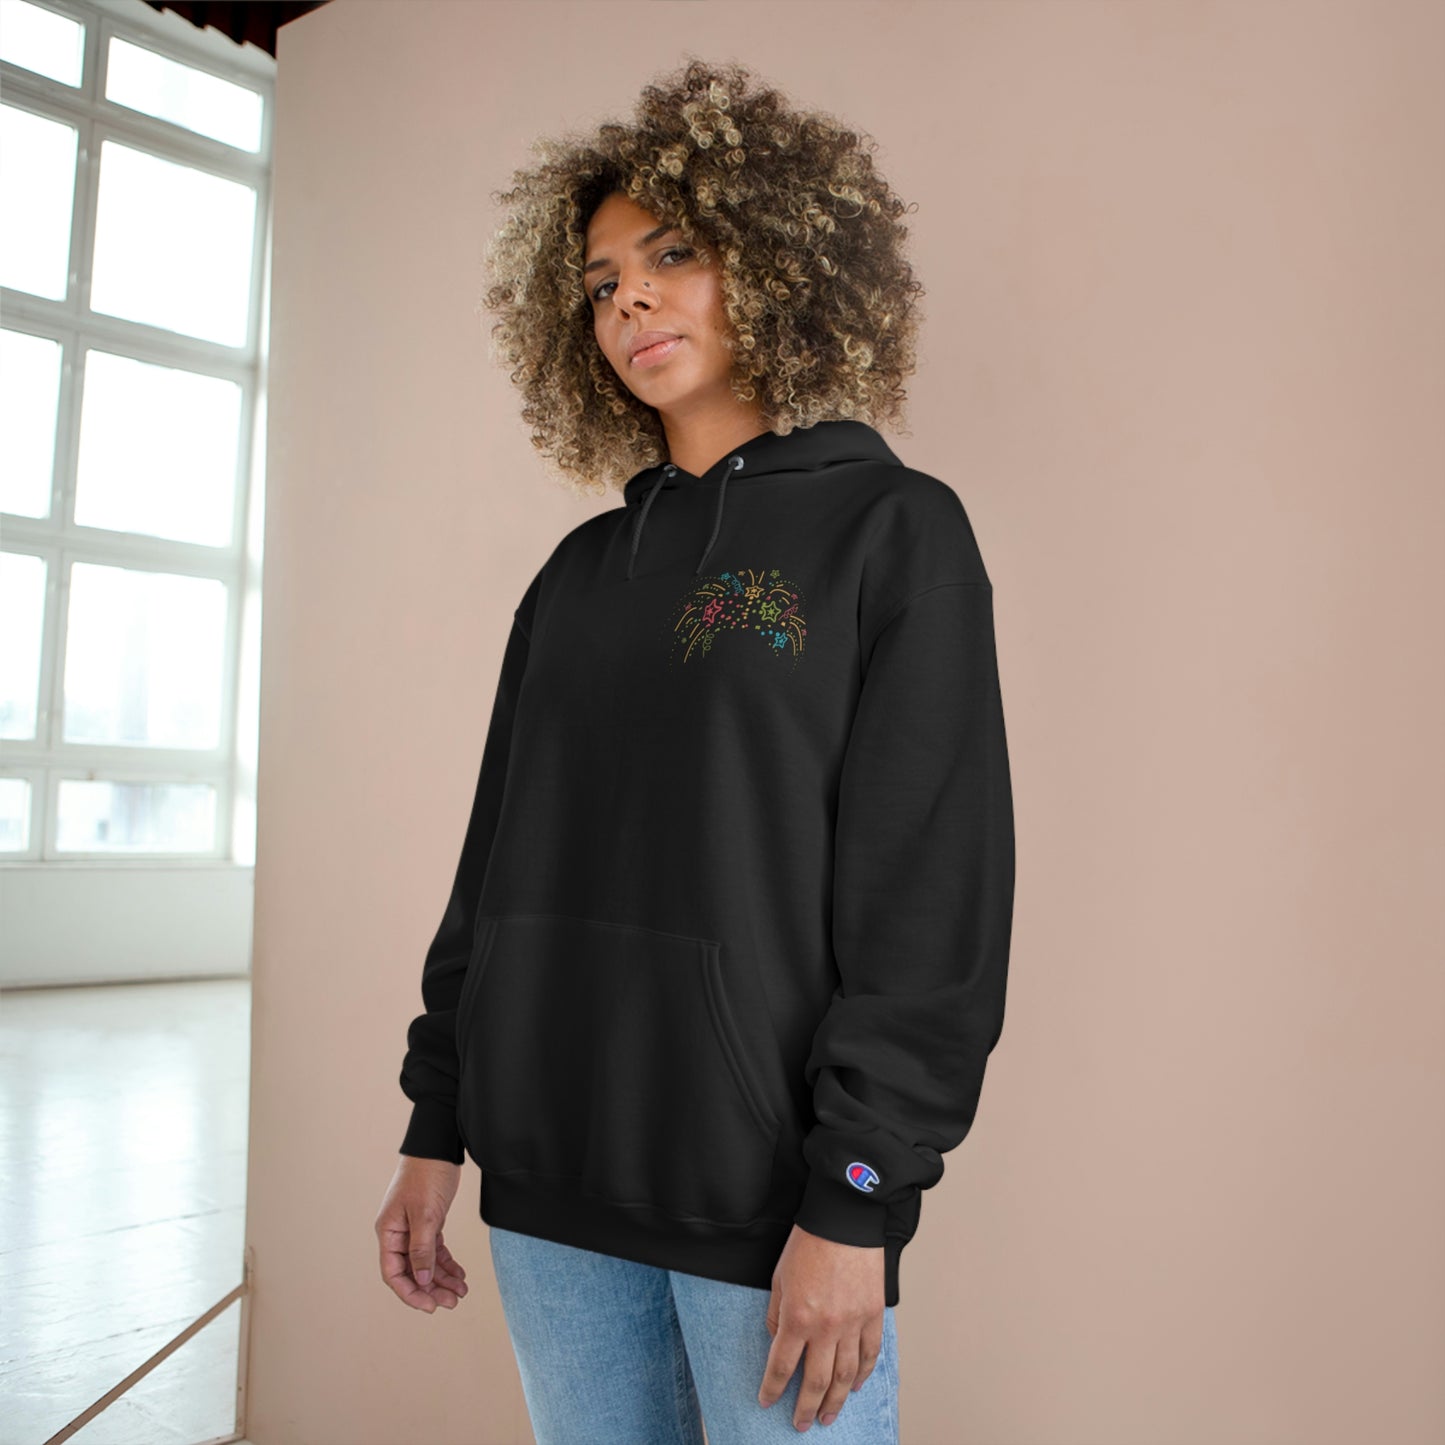 ‘And then, just like that, she did it! ‘  Printed Front & Back. Champion Hoodie